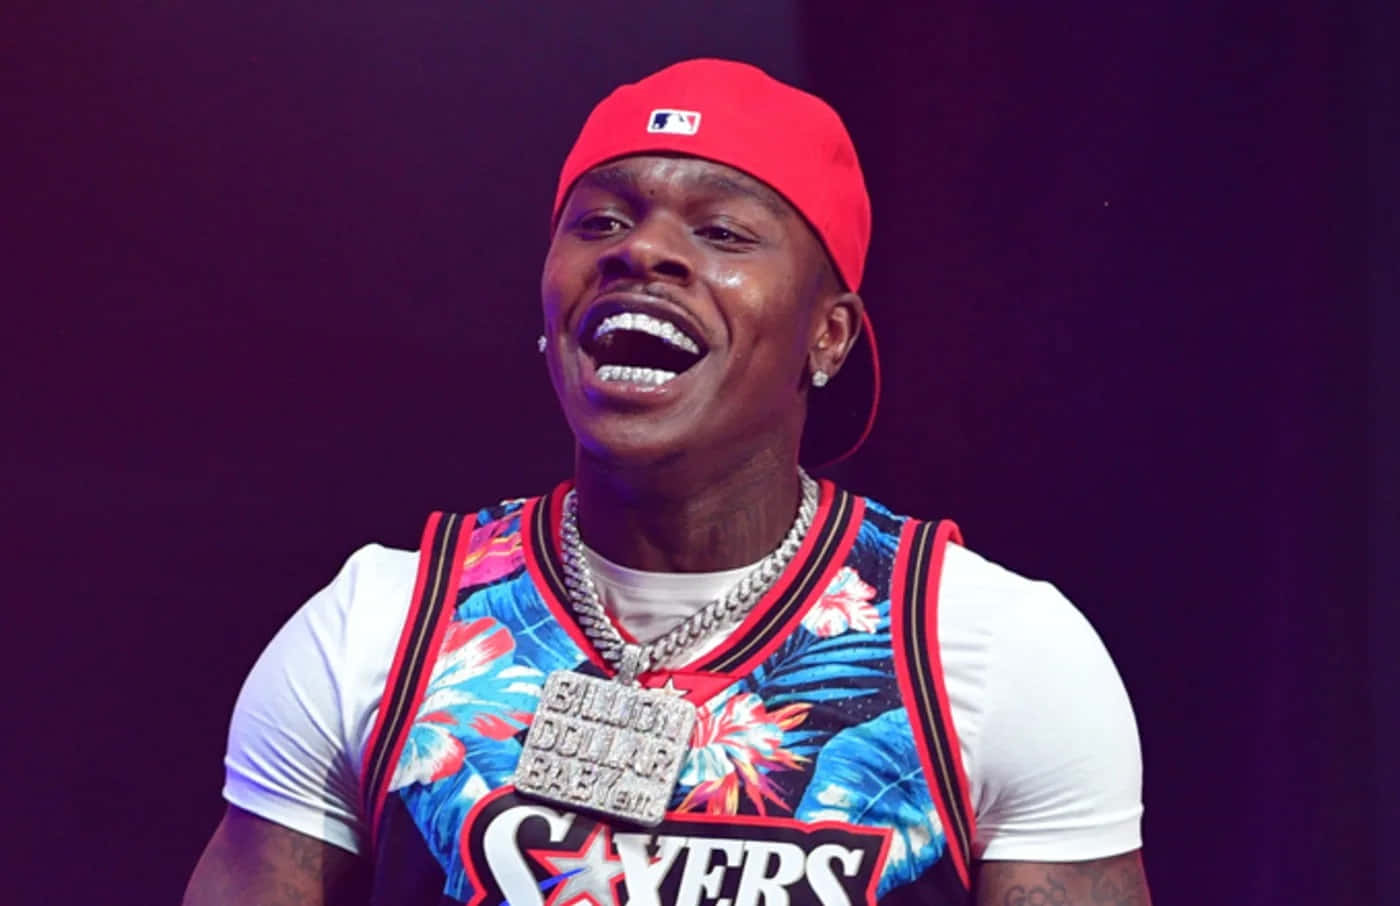 American rapper and songwriter DaBaby poses confidently